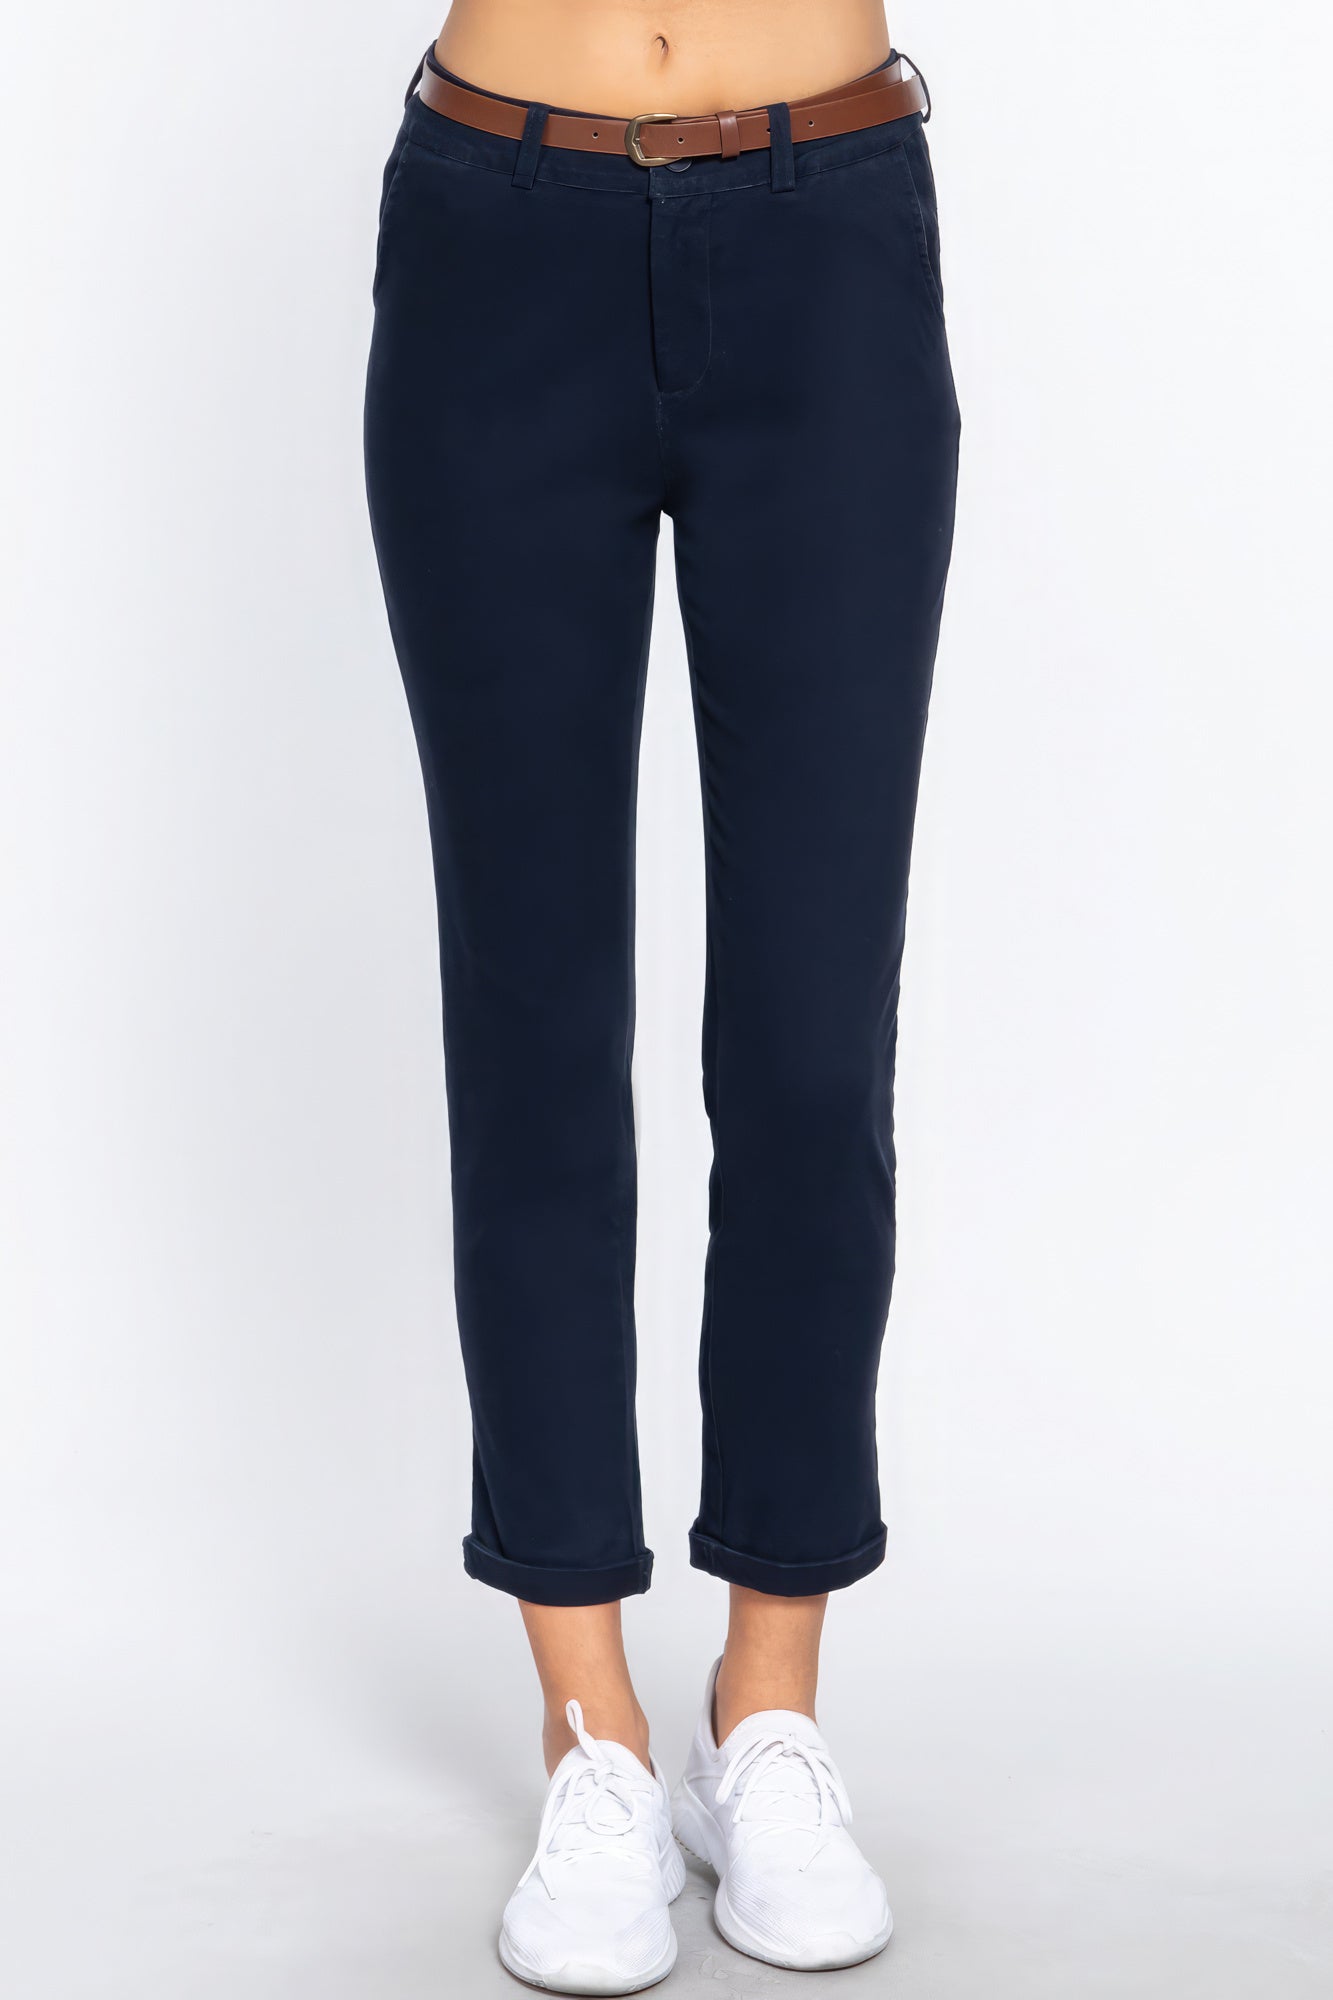 Cotton-span Twill Belted Long Pants: Women's Stretch Dark Navy Trousers with Belt